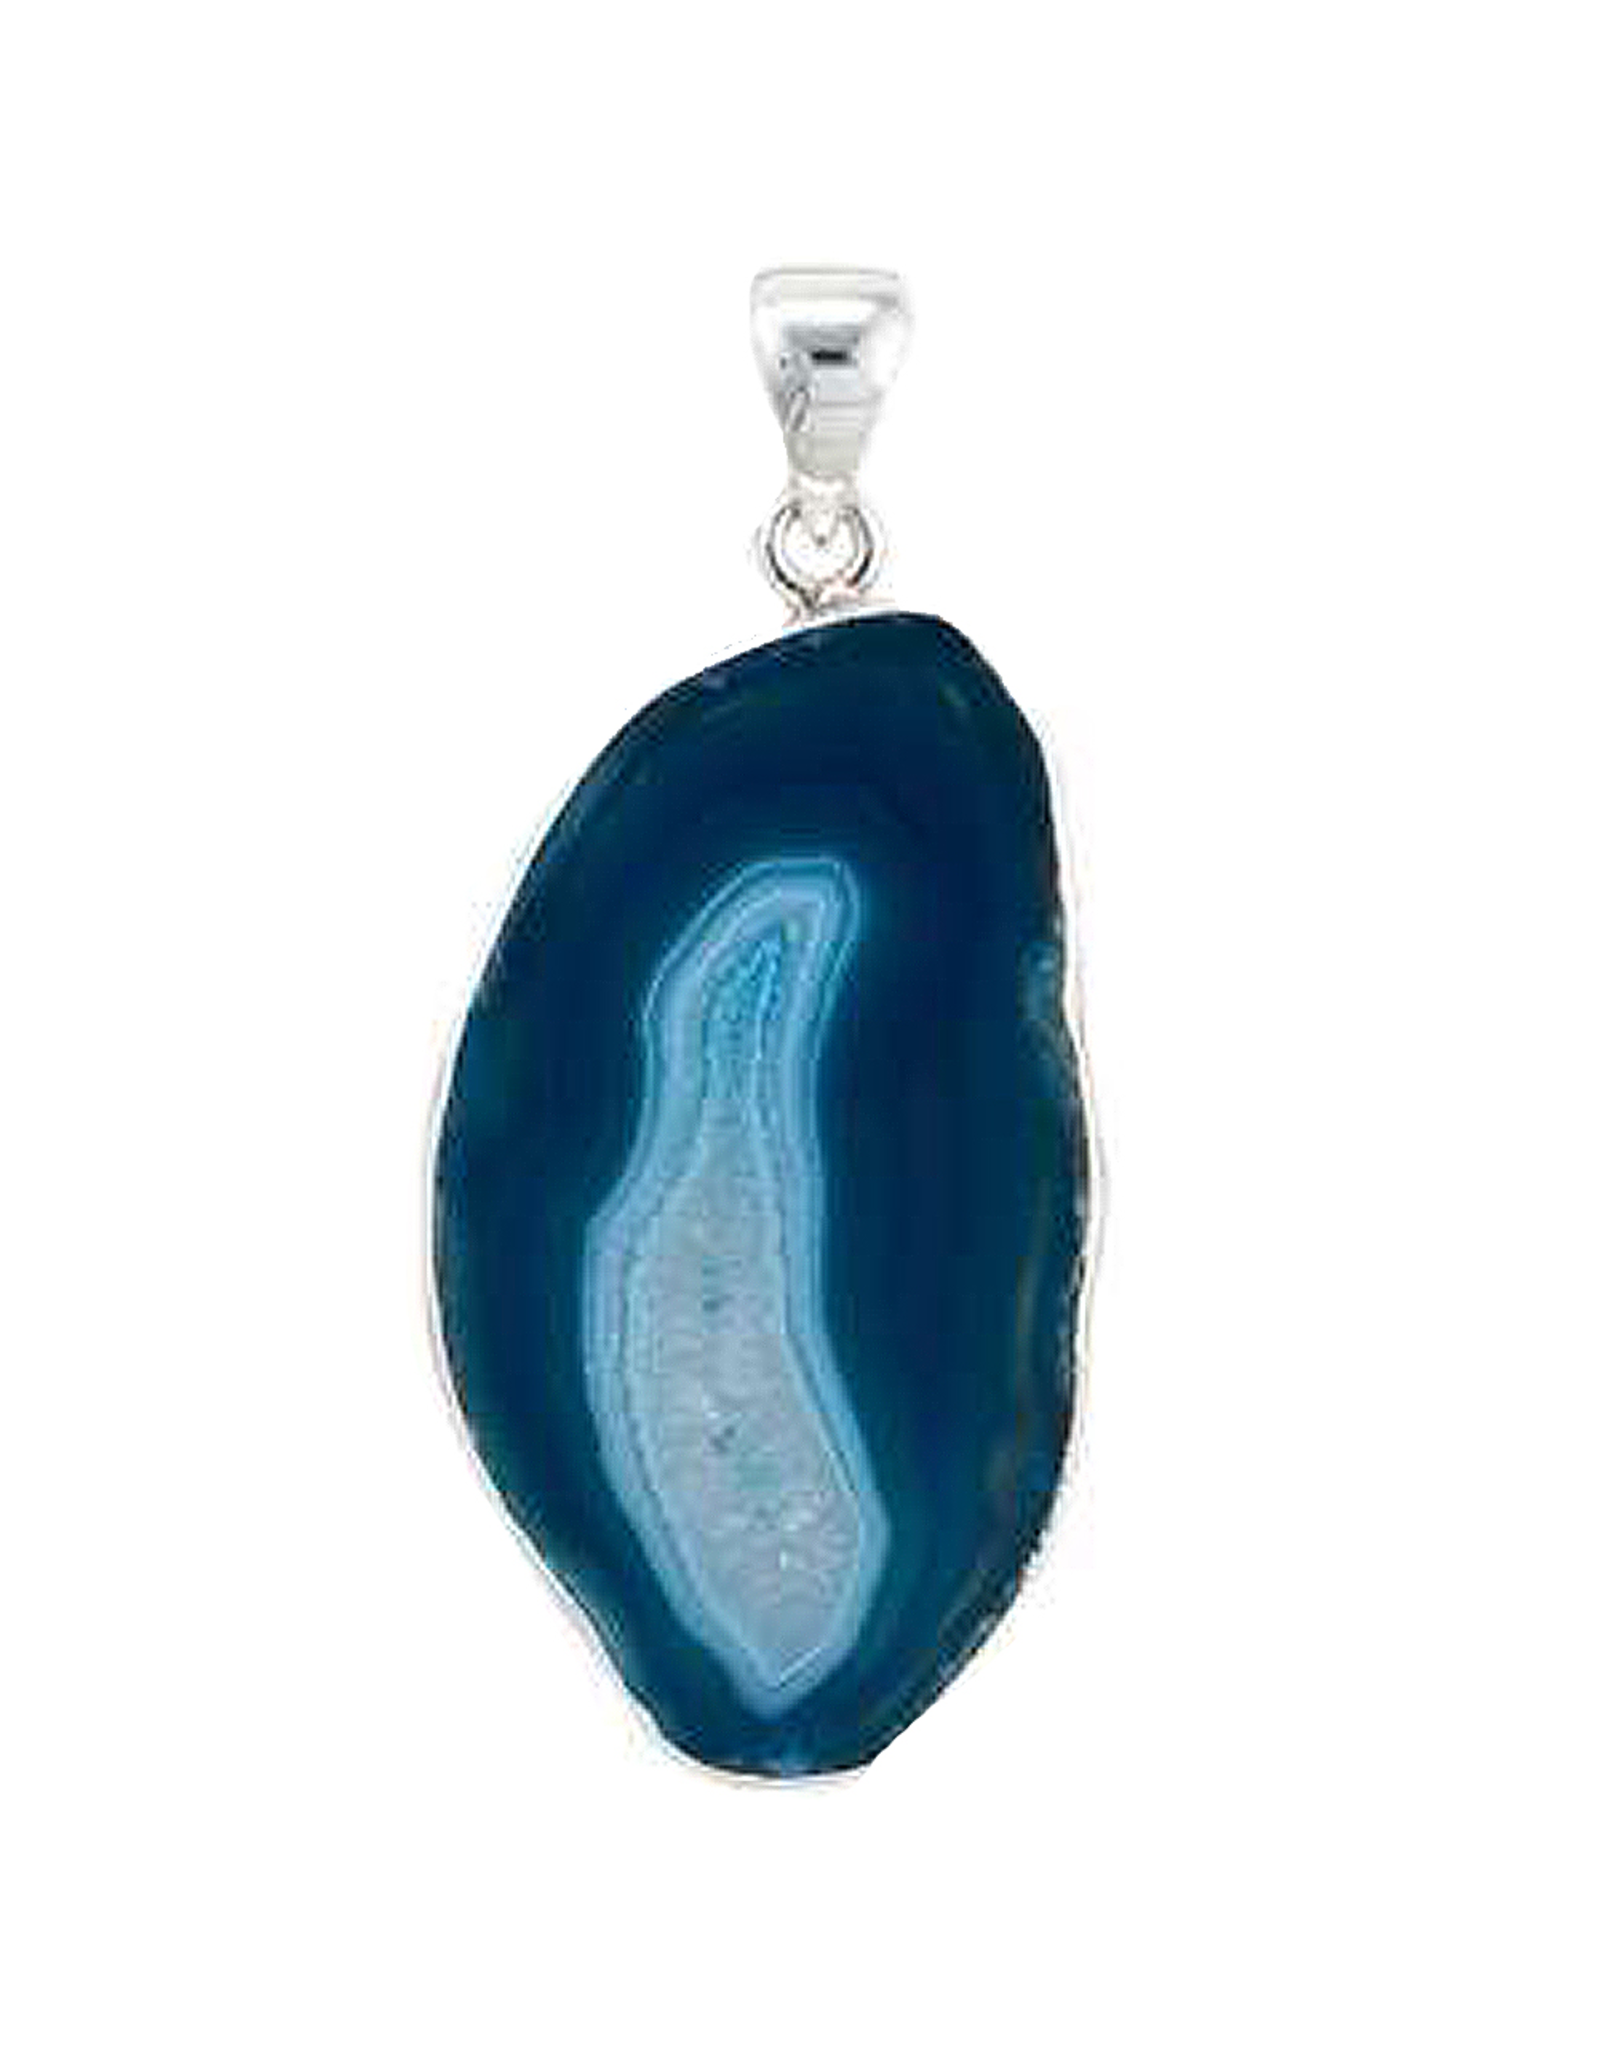 Charles Albert Jewelry Sterling Silver w Agate Slice Pendant - Blue